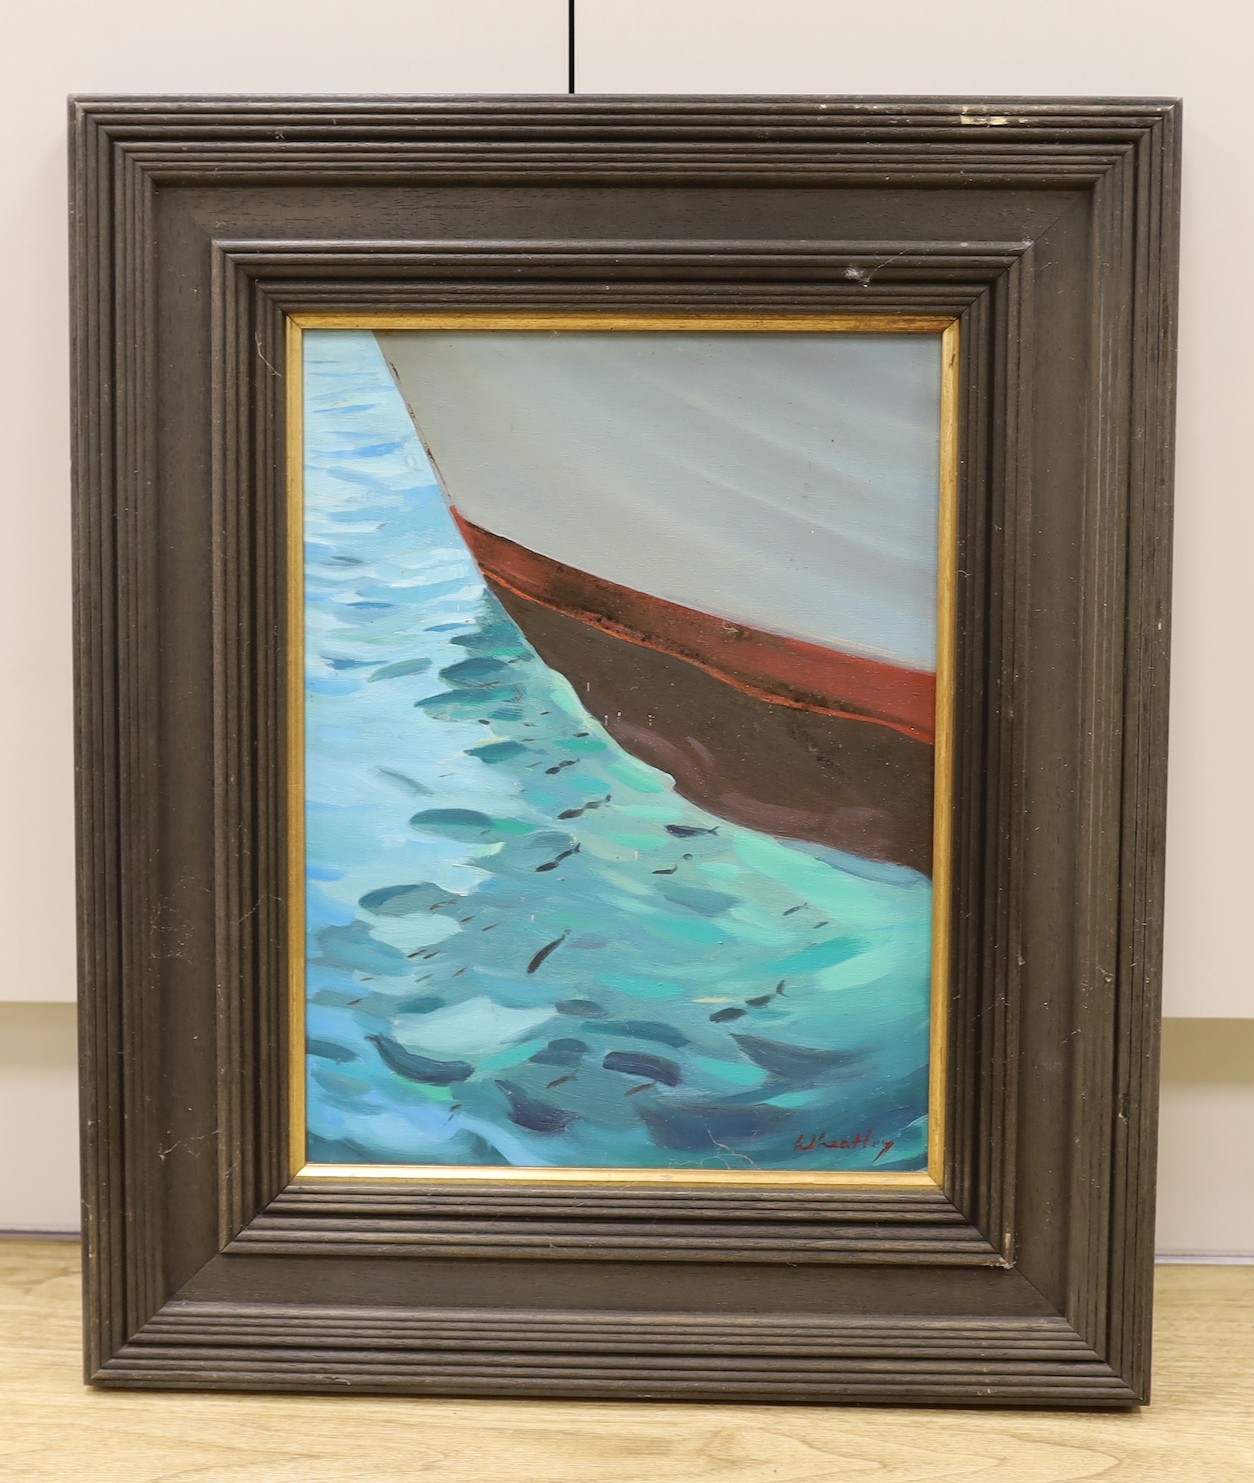 Wheatley, oil on board, Fish beneath the hull of a boat, signed, 38 x 29cm